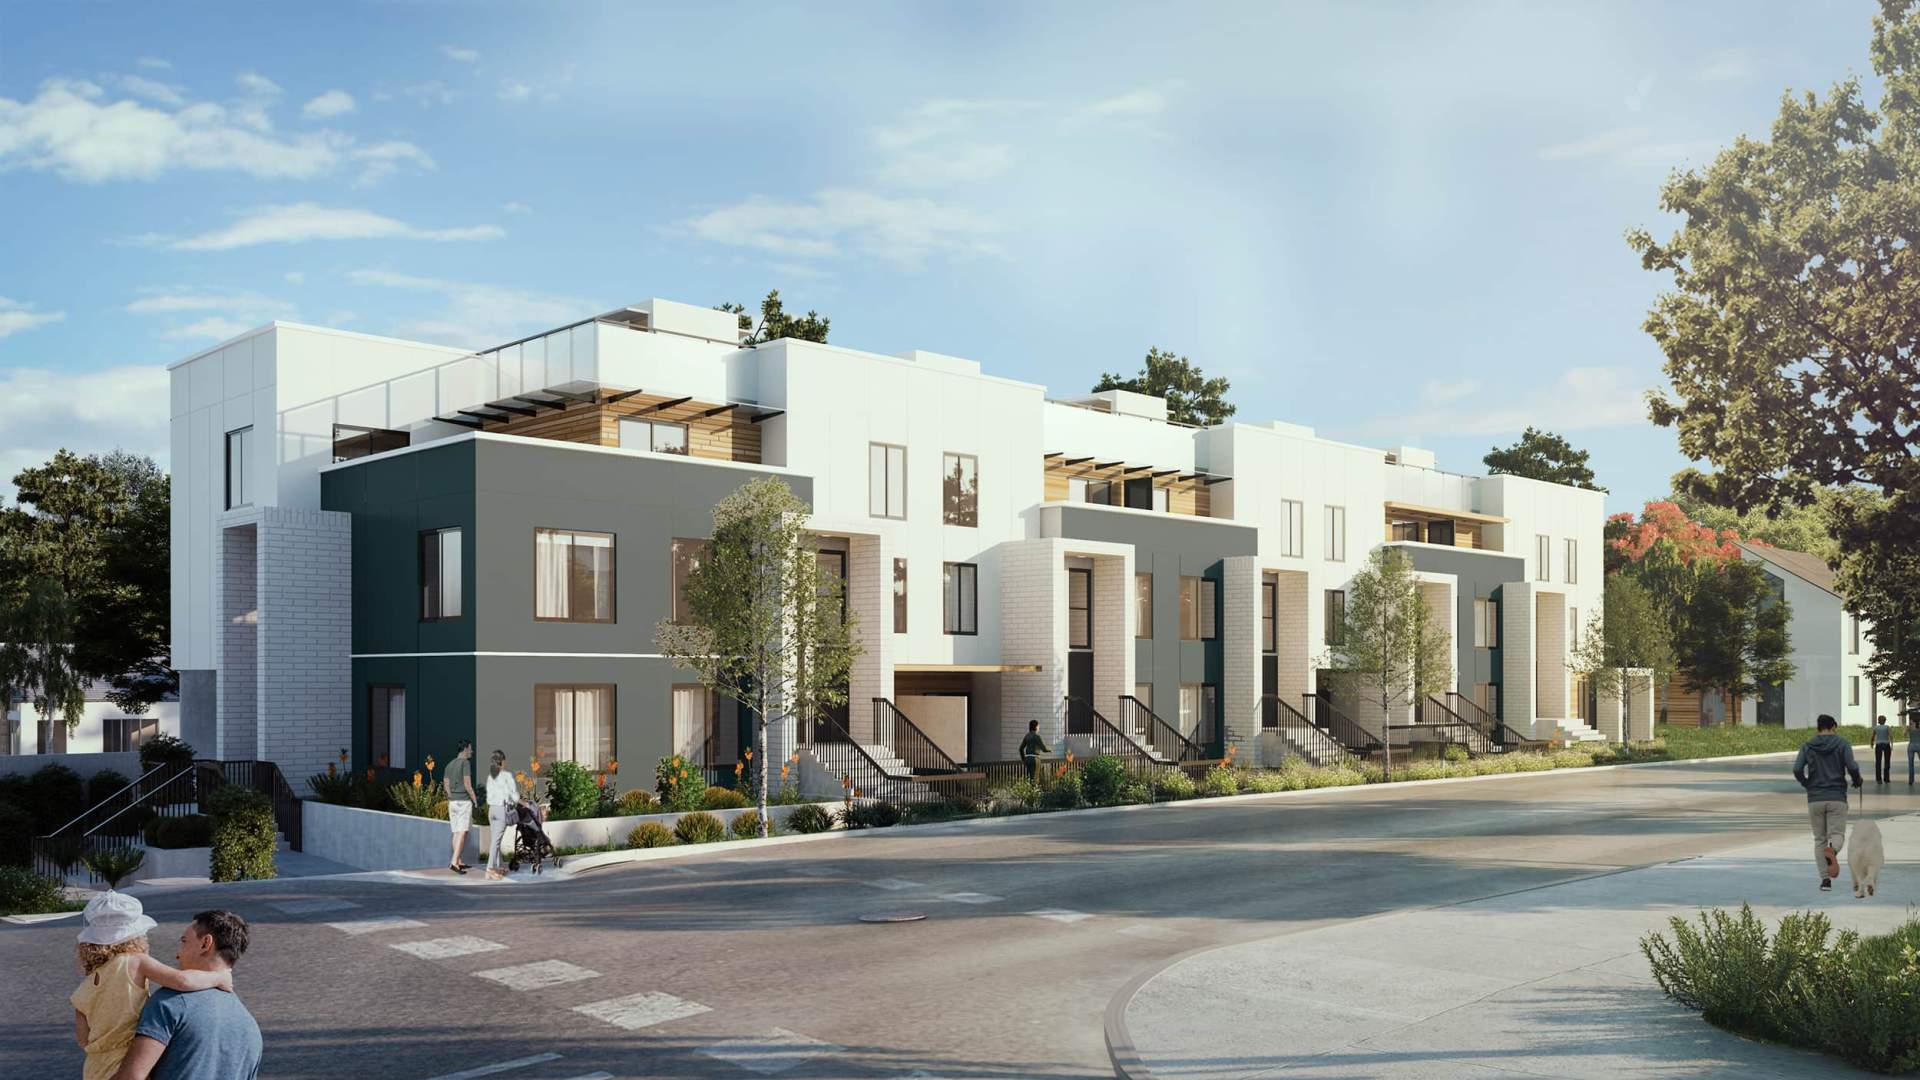 A collection of 17 modern city townhomes and garden flats in Metrotown.